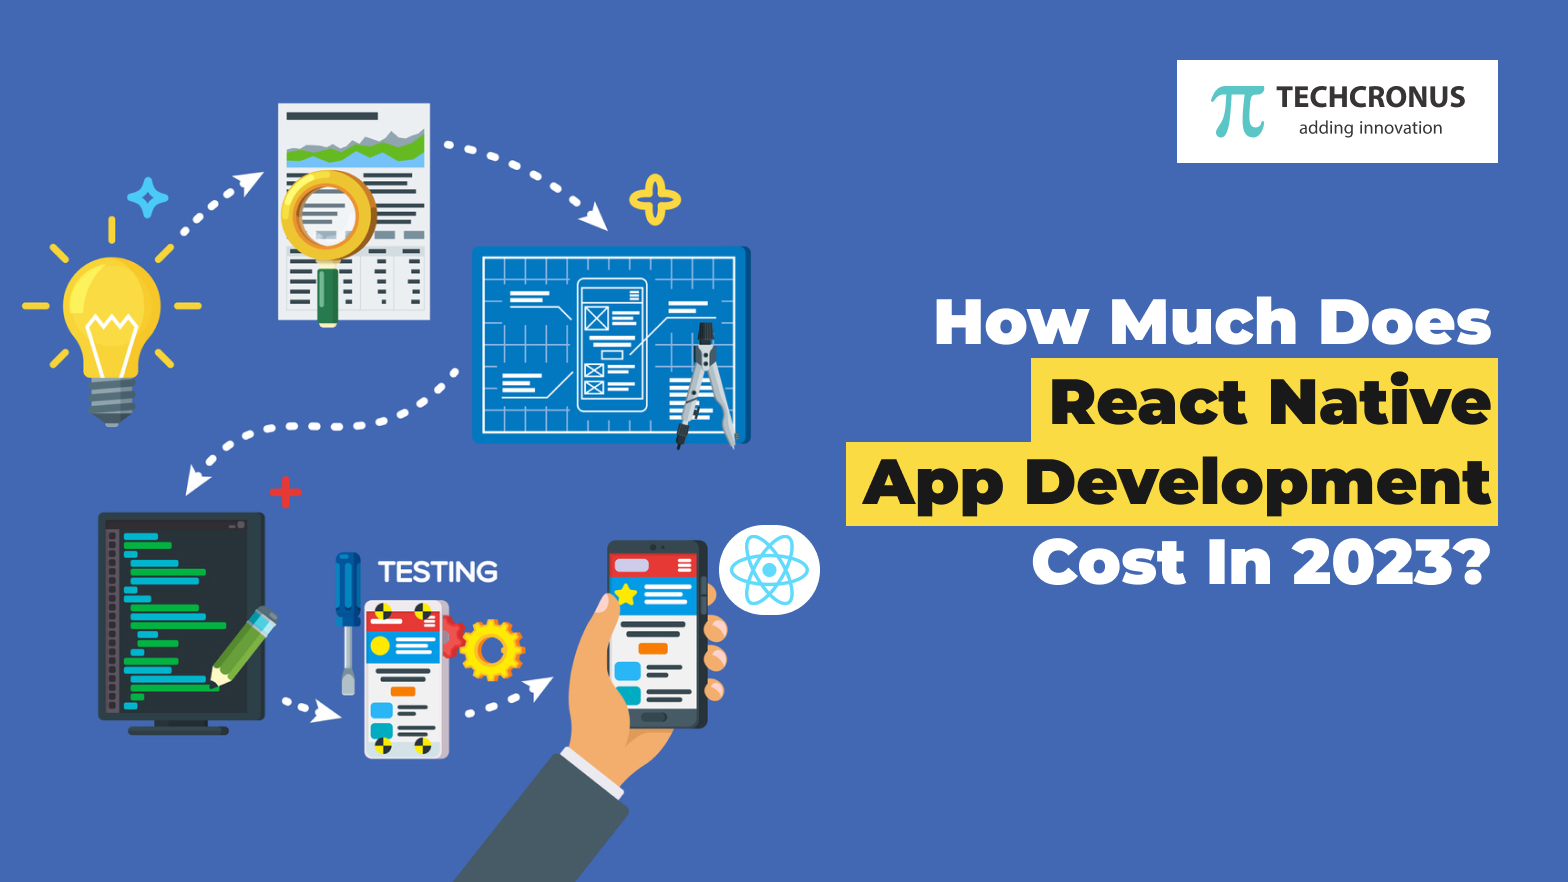 Do you want to build your React Native Application with our Mobile App Development Experts_